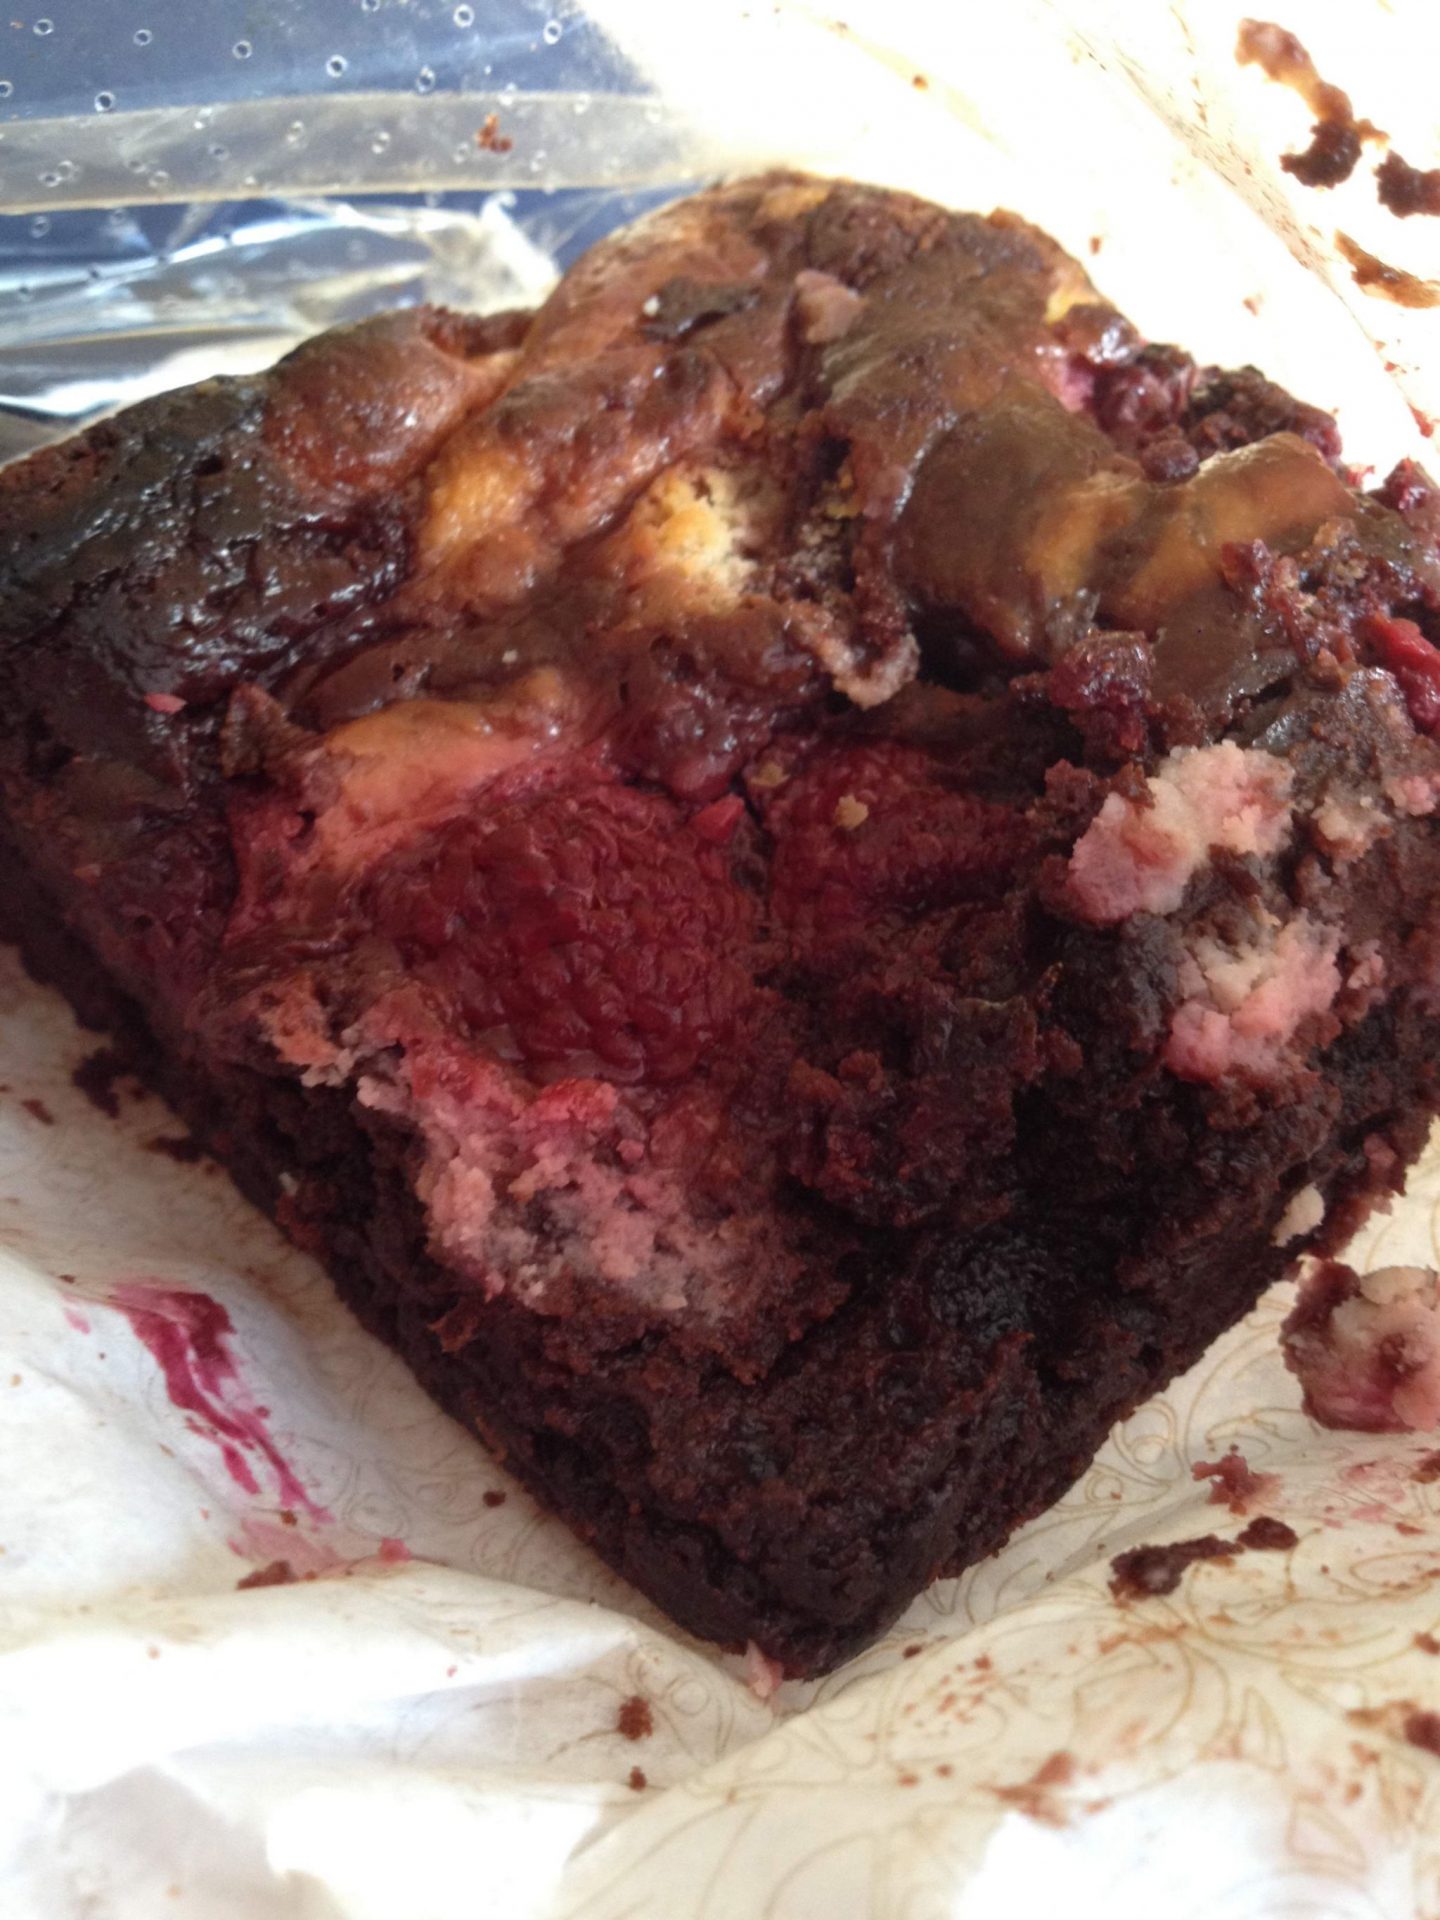 Raspberry and cream cheese brownie from Harrods, London